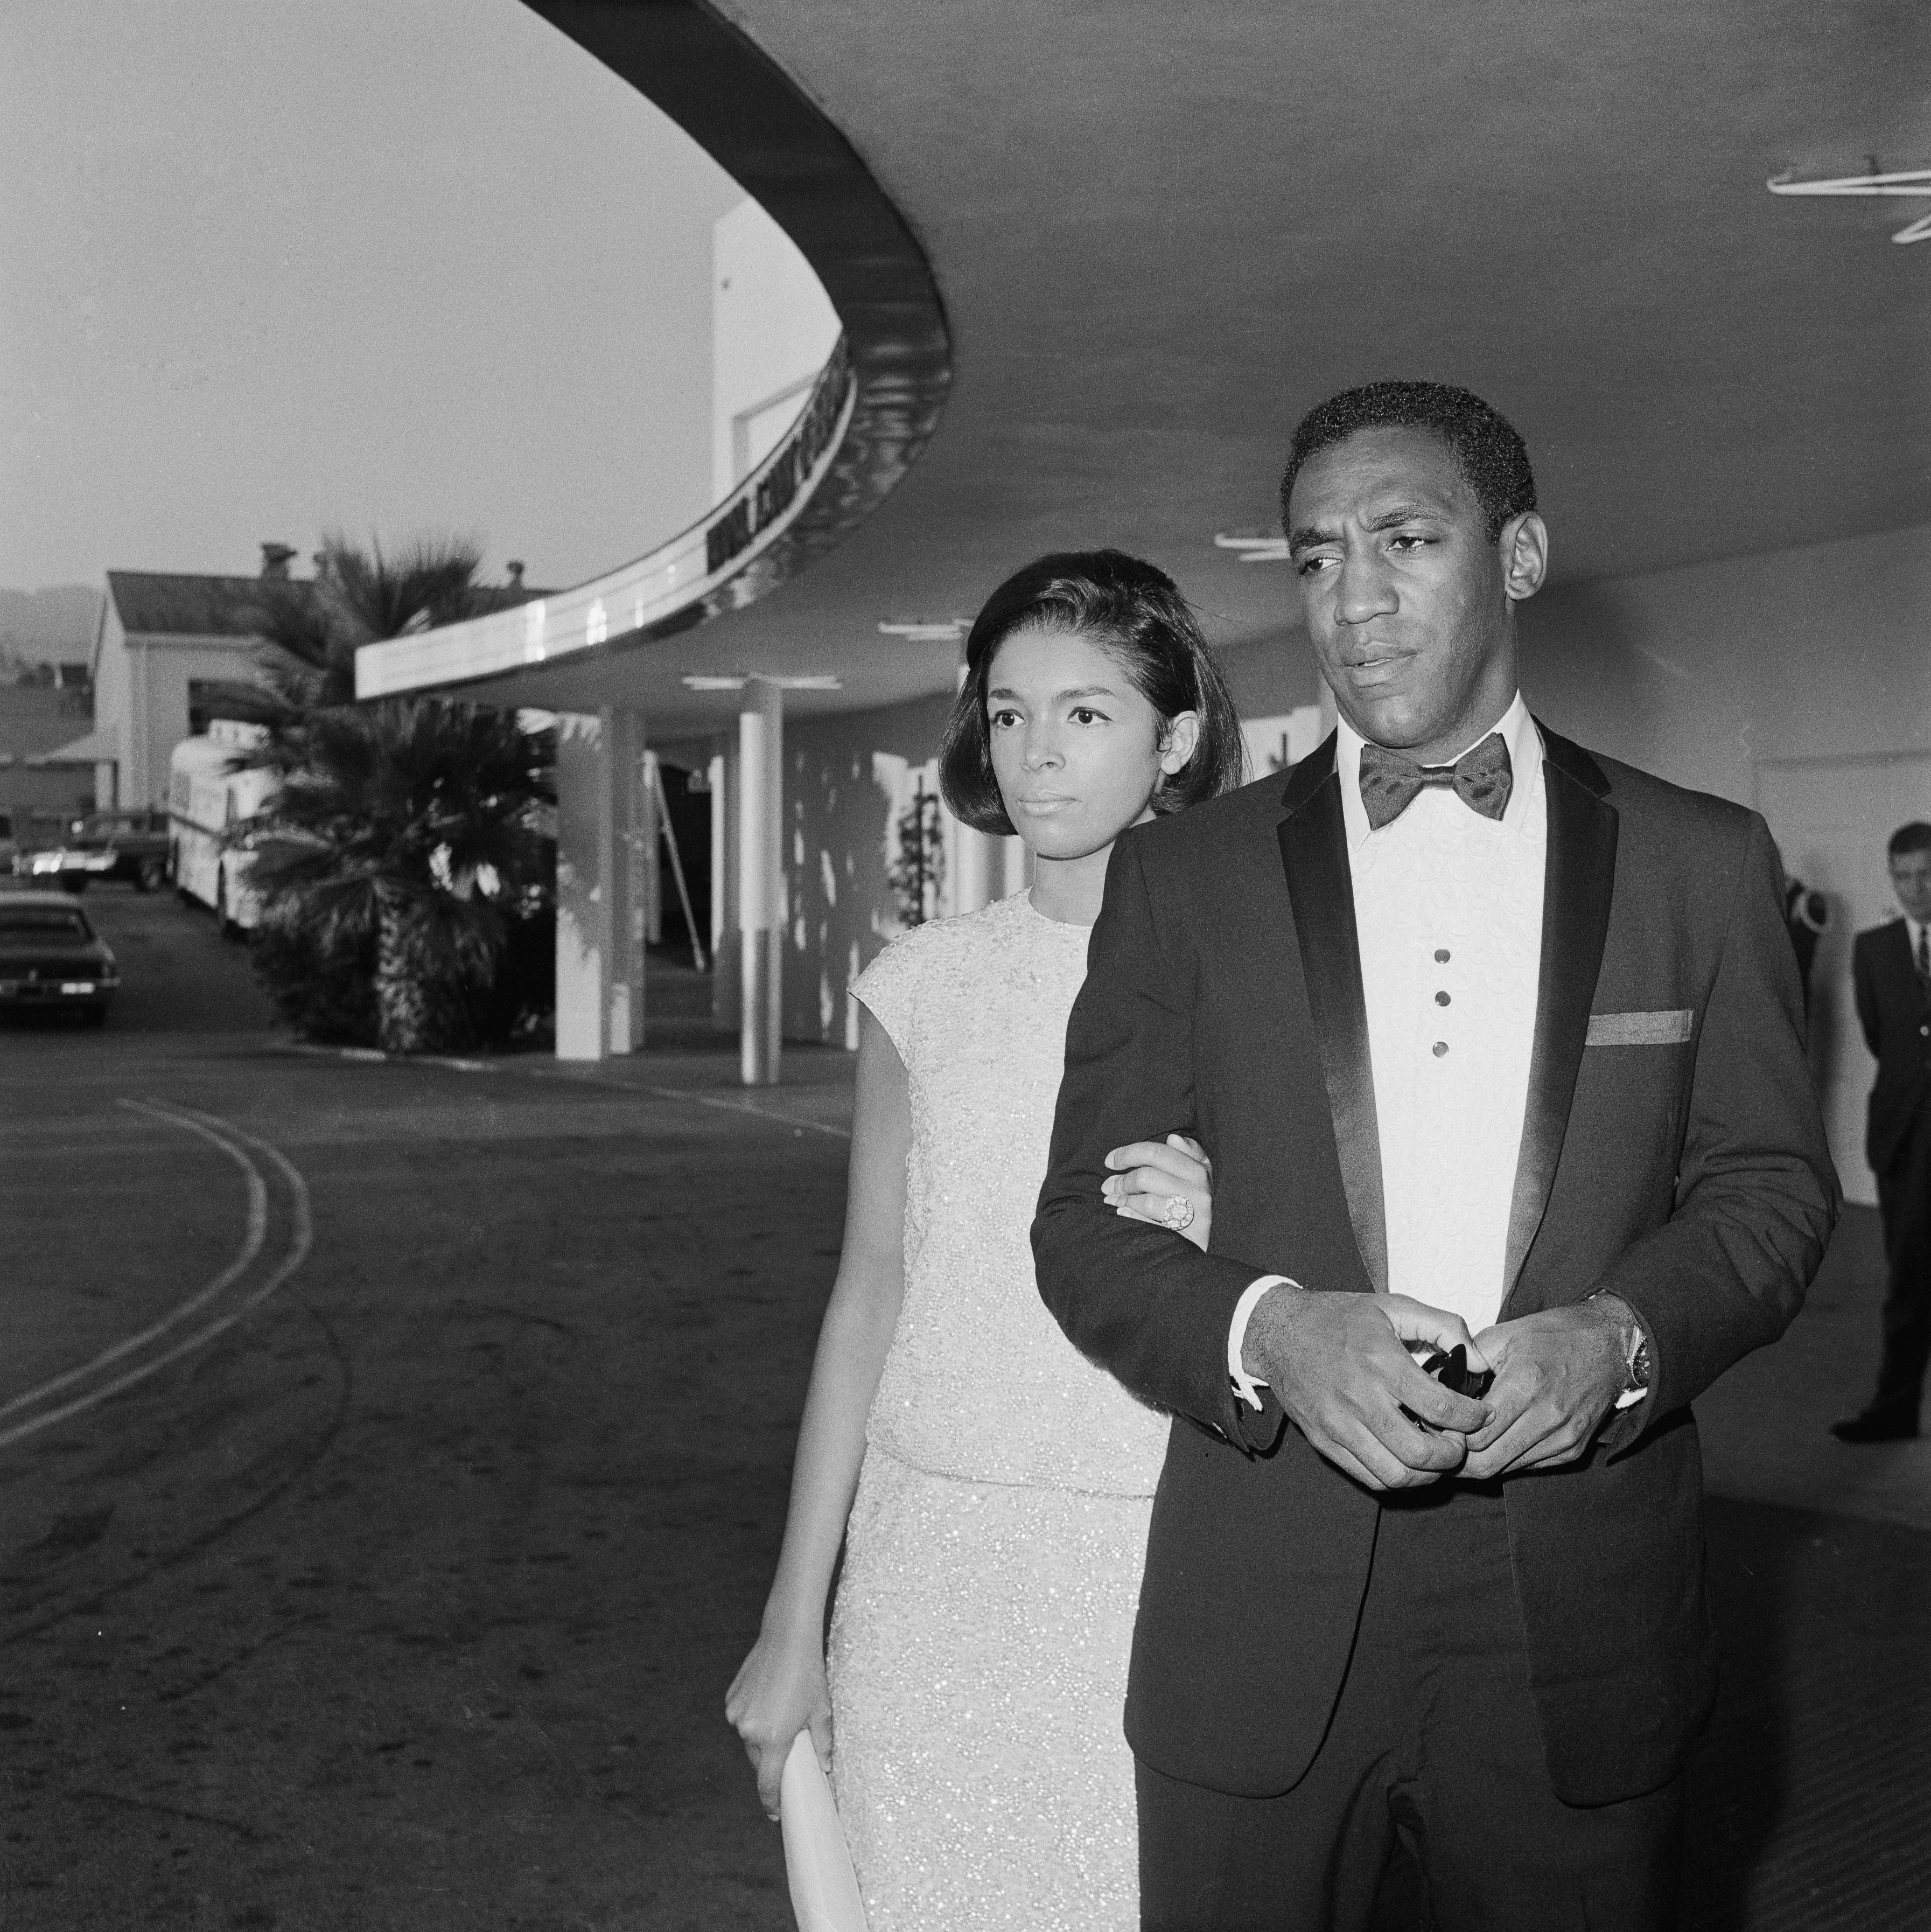 Camille and Bill Cosby in Hollywood, California at the Emmy Awards on September 12, 1965 | Photos: Bettmann/Getty Images